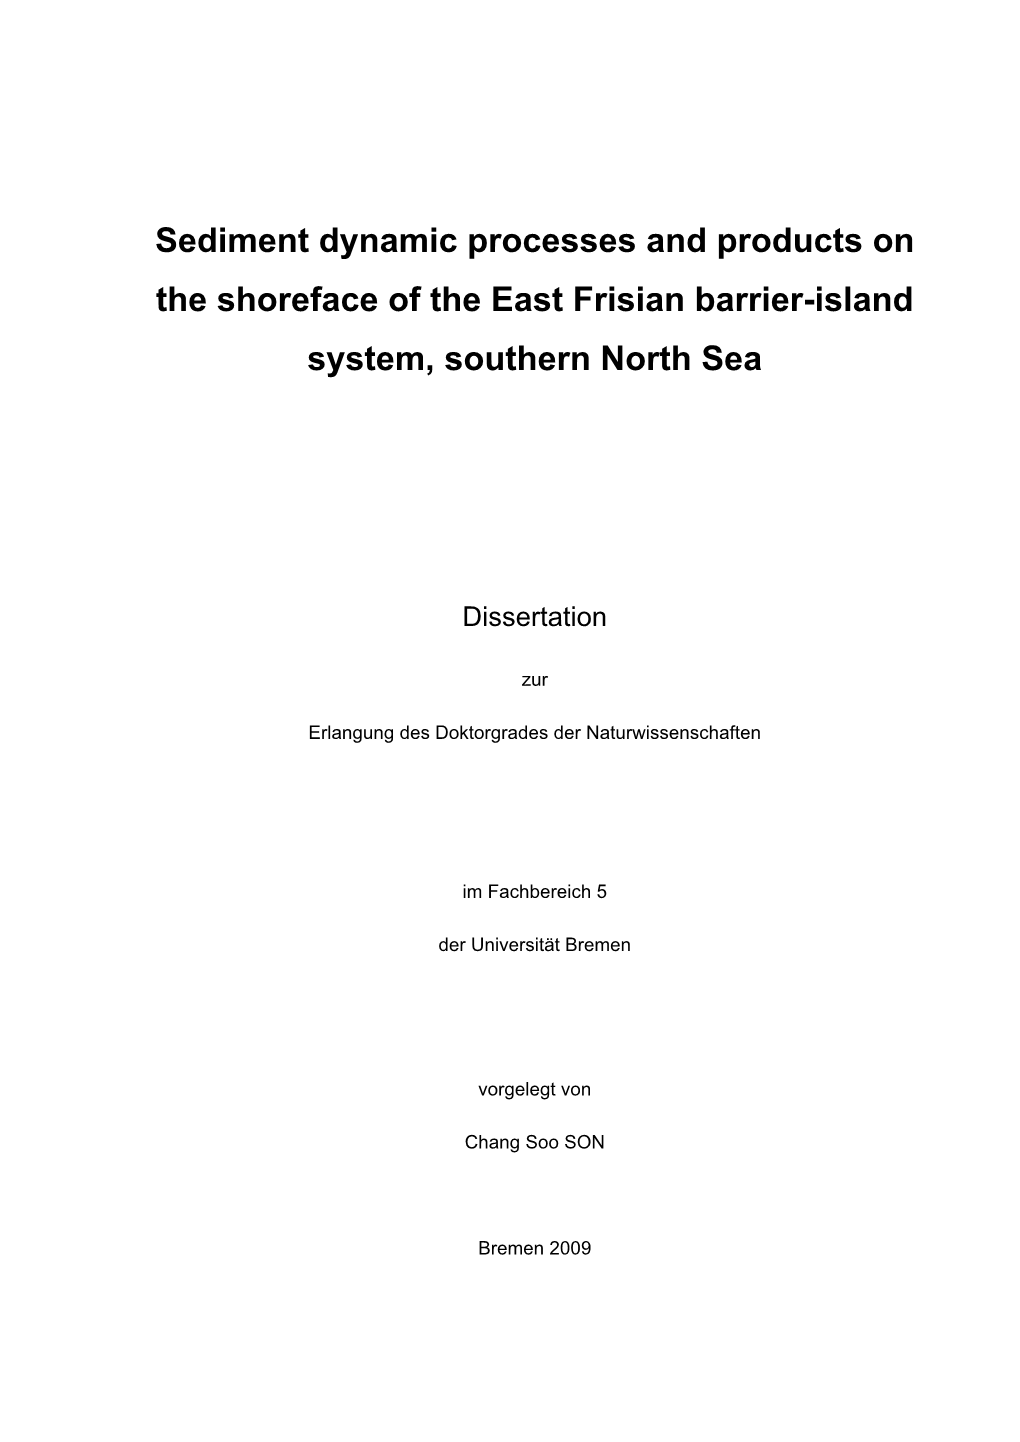 Sediment Dynamic Processes and Products on the Shoreface of the East Frisian Barrier-Island System, Southern North Sea